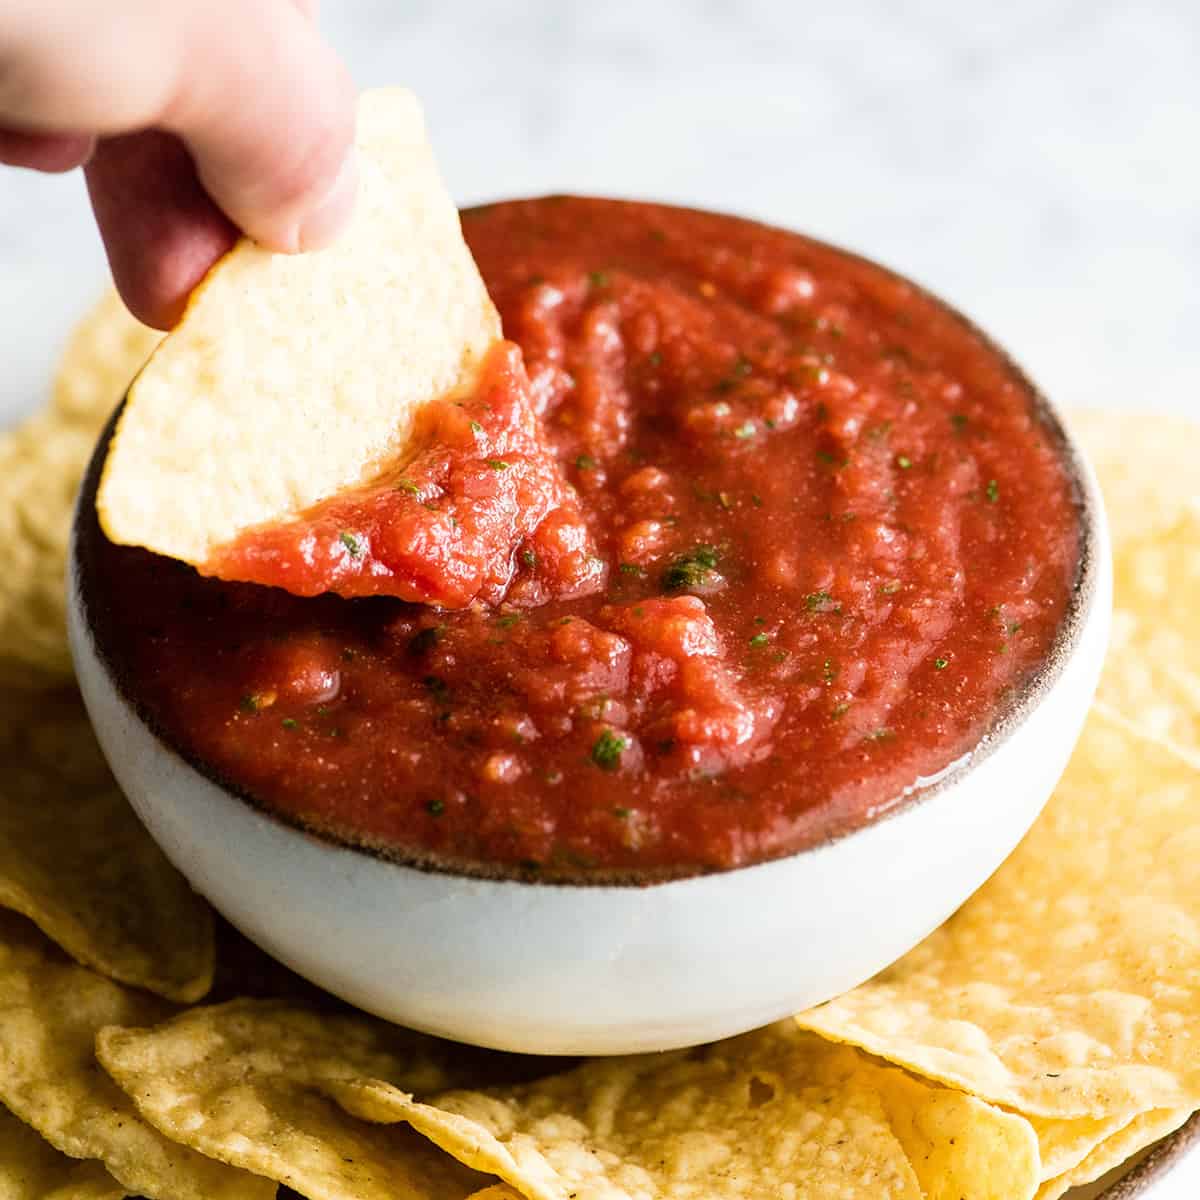 side view of a chip being dipped into a bowl of homemade salsa